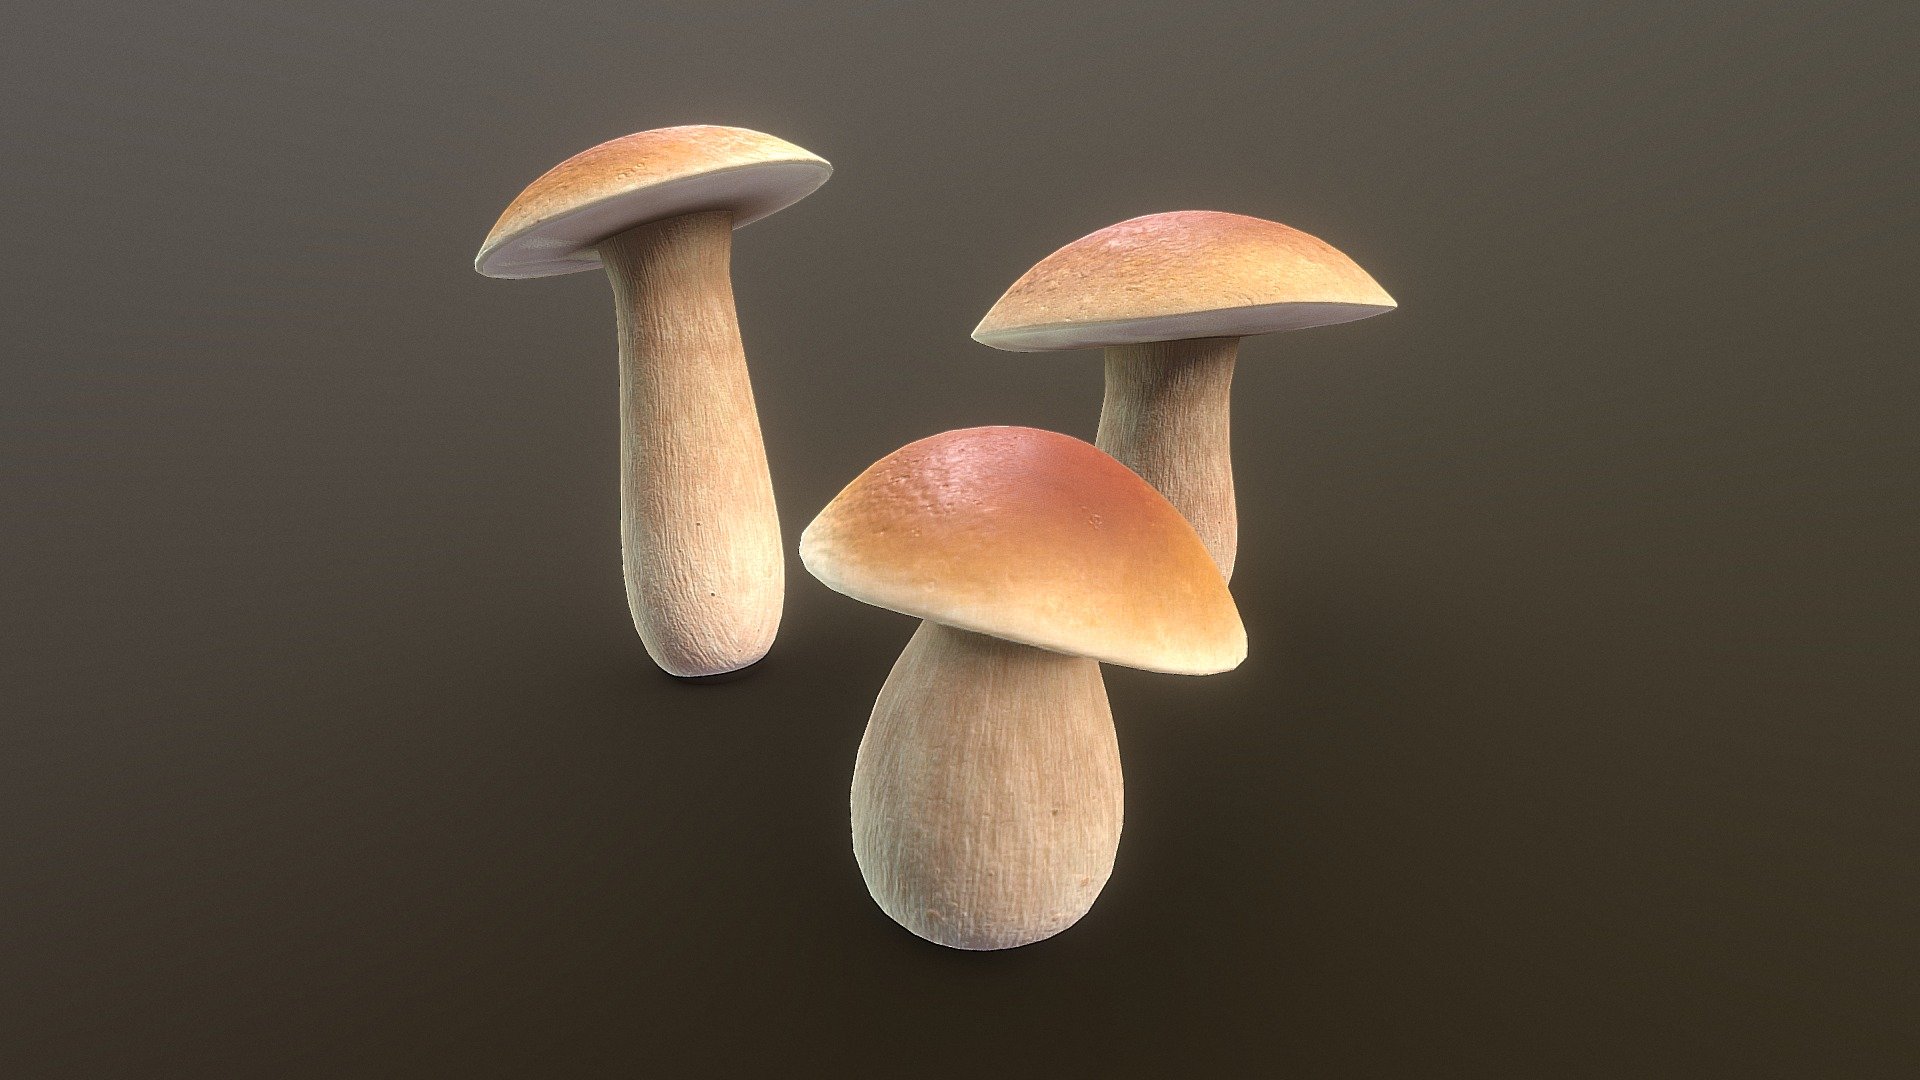 A set of 3 handpainted mushrooms, type Boletus chippewaensis (also called cep or porcini). Textured with Substance Painter 3d model